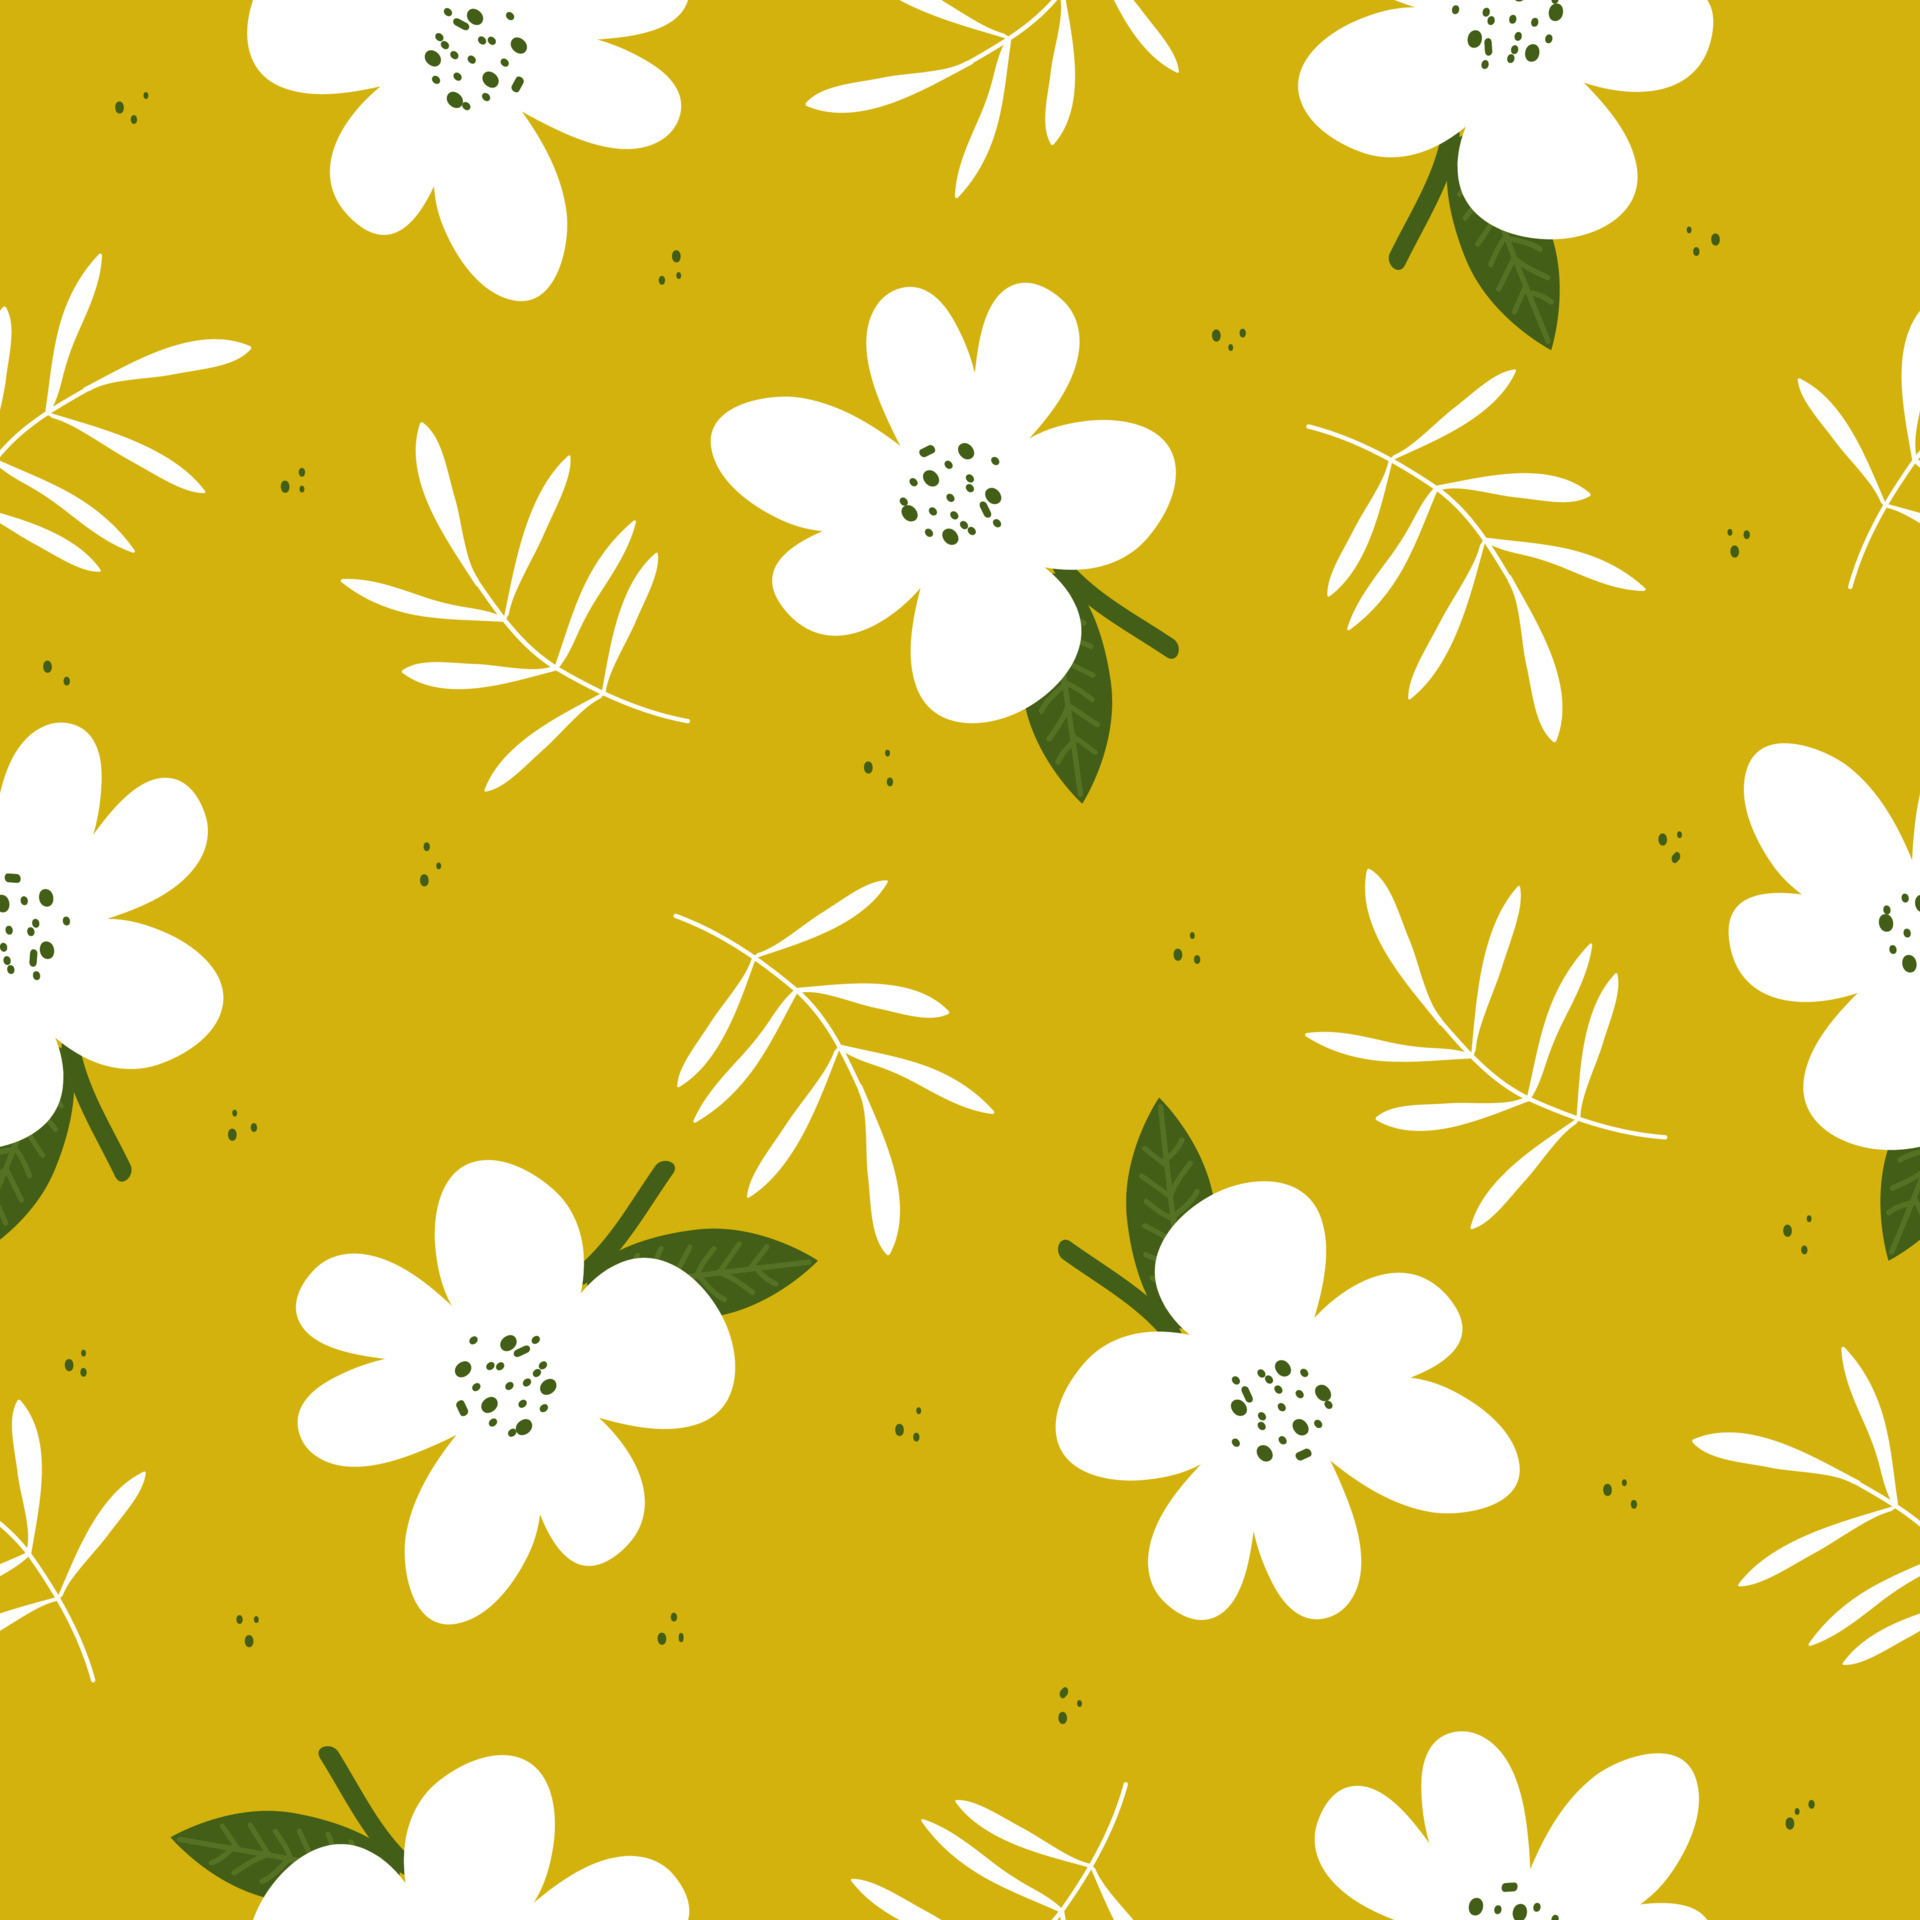 Cute hand drawn vintage floral pattern seamless background vector ...